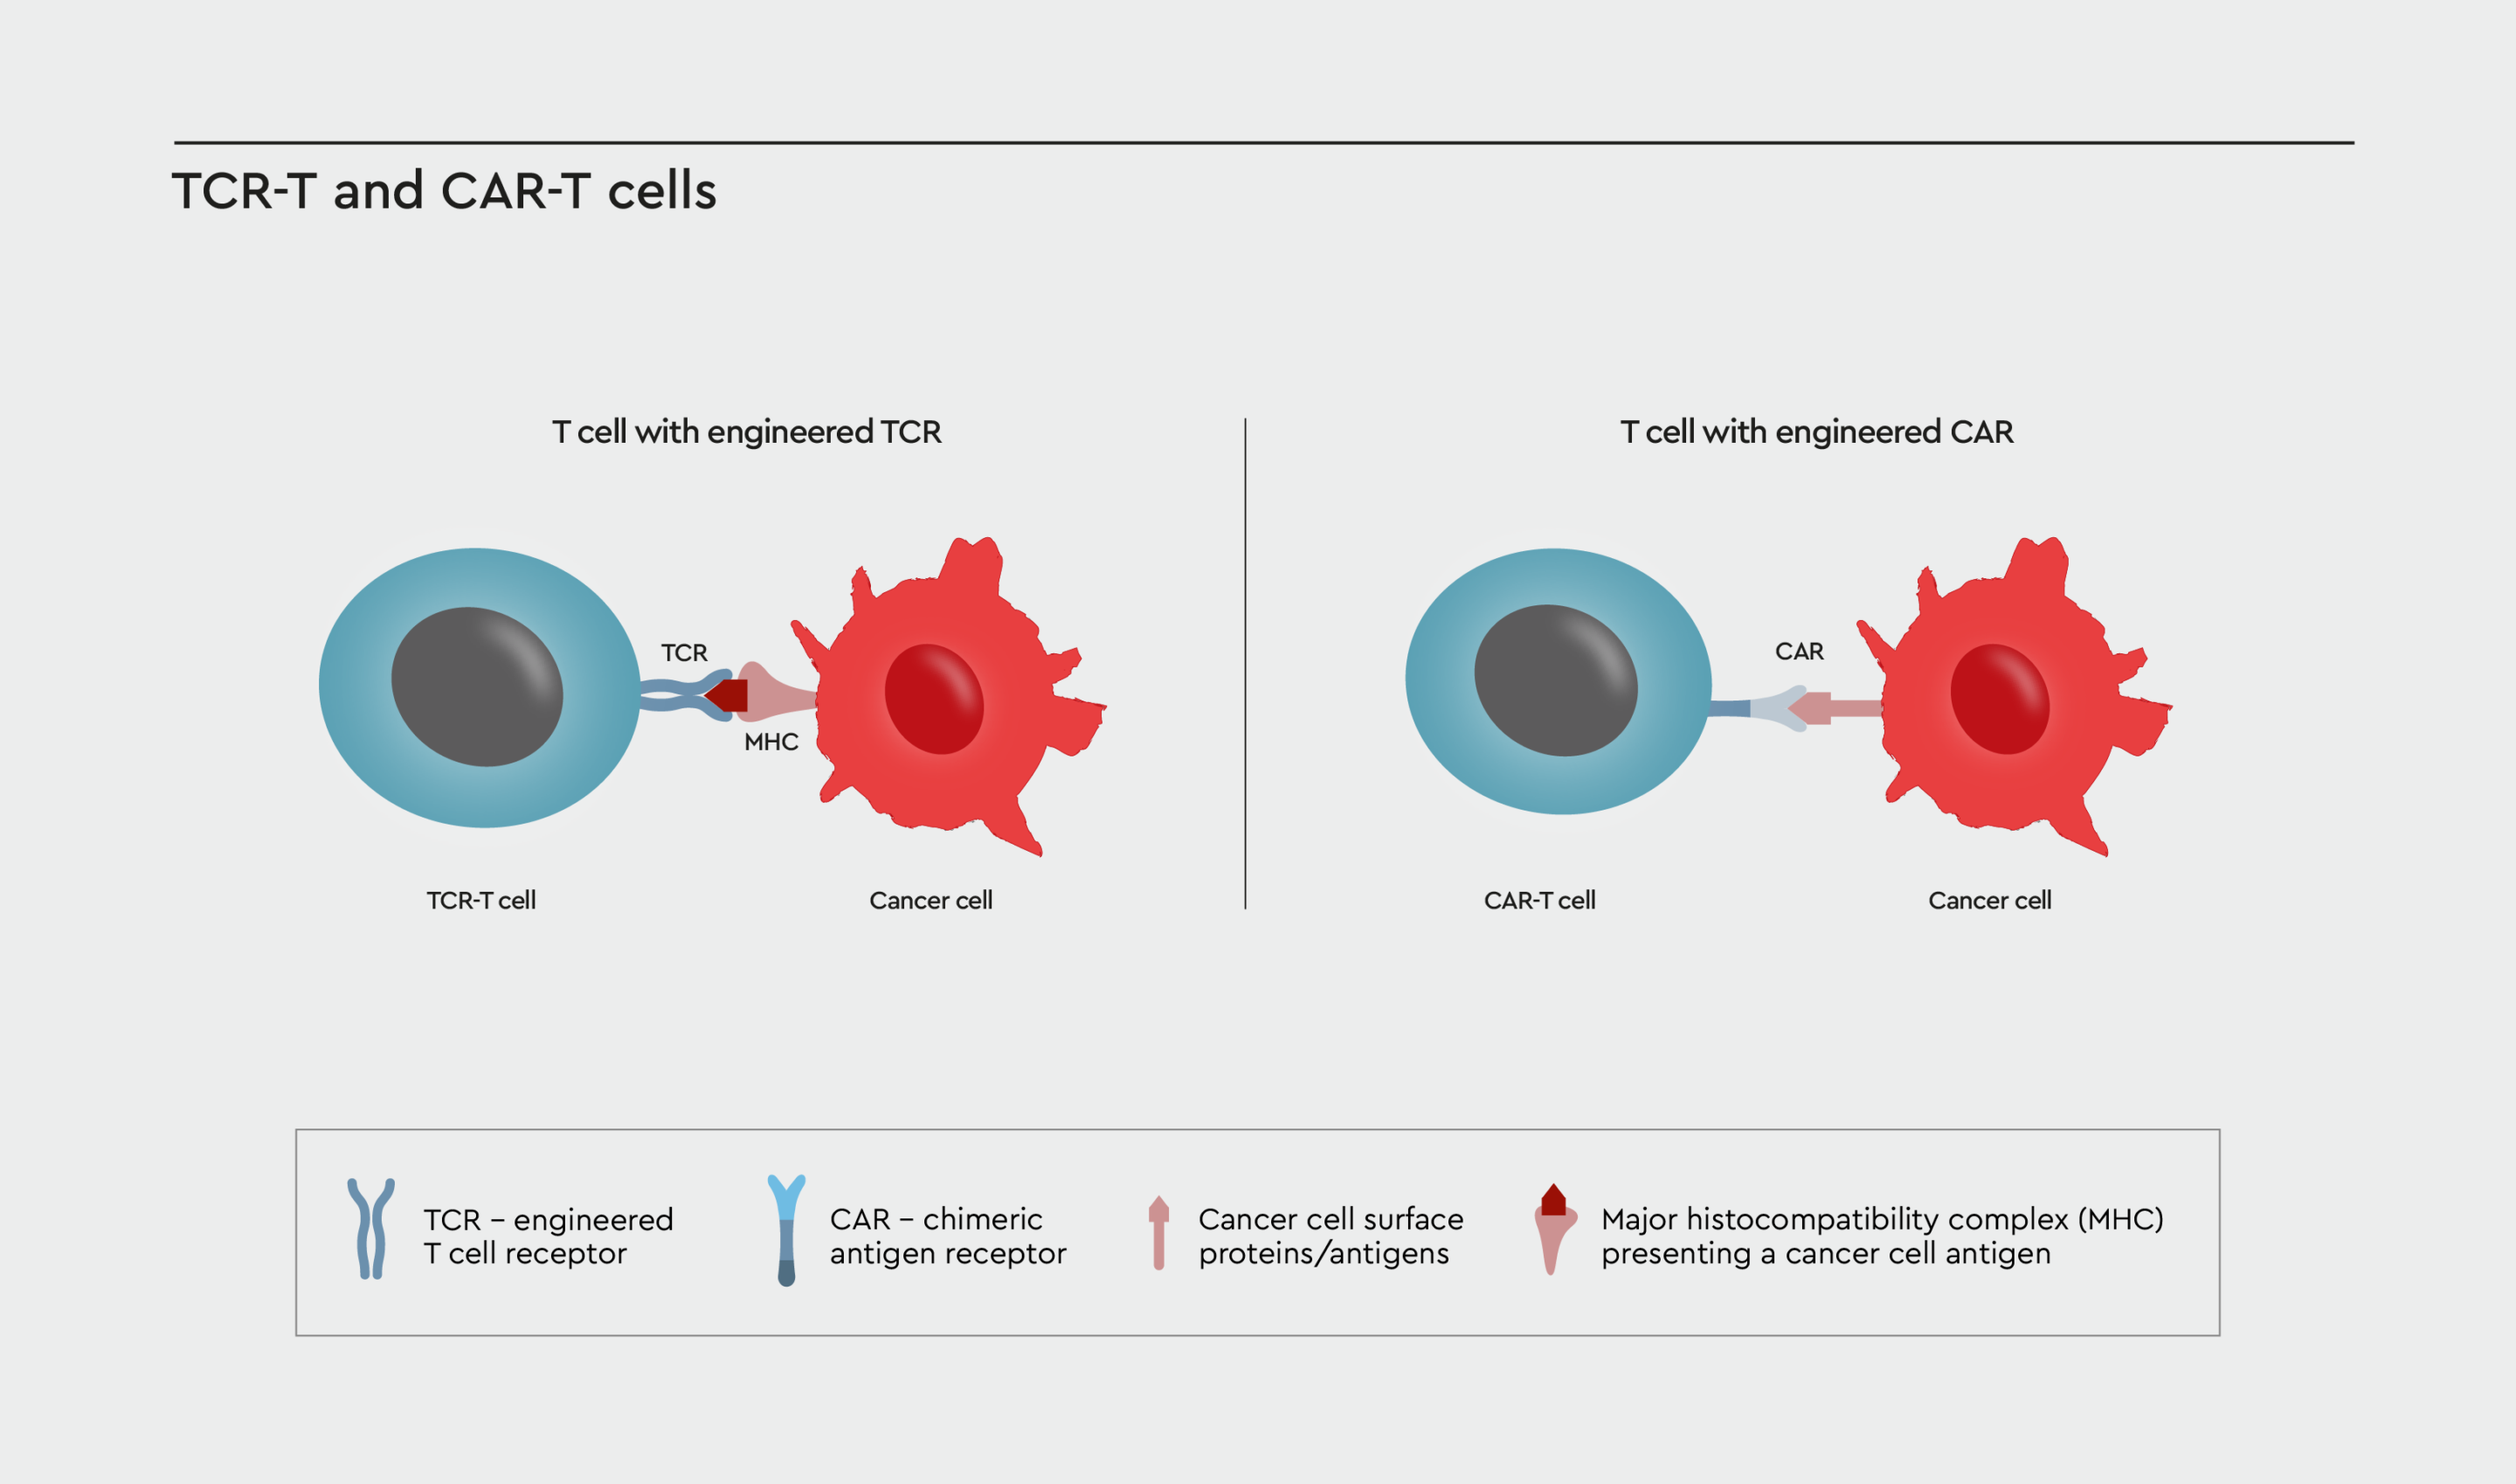 TCR- or CAR-engineered T cells